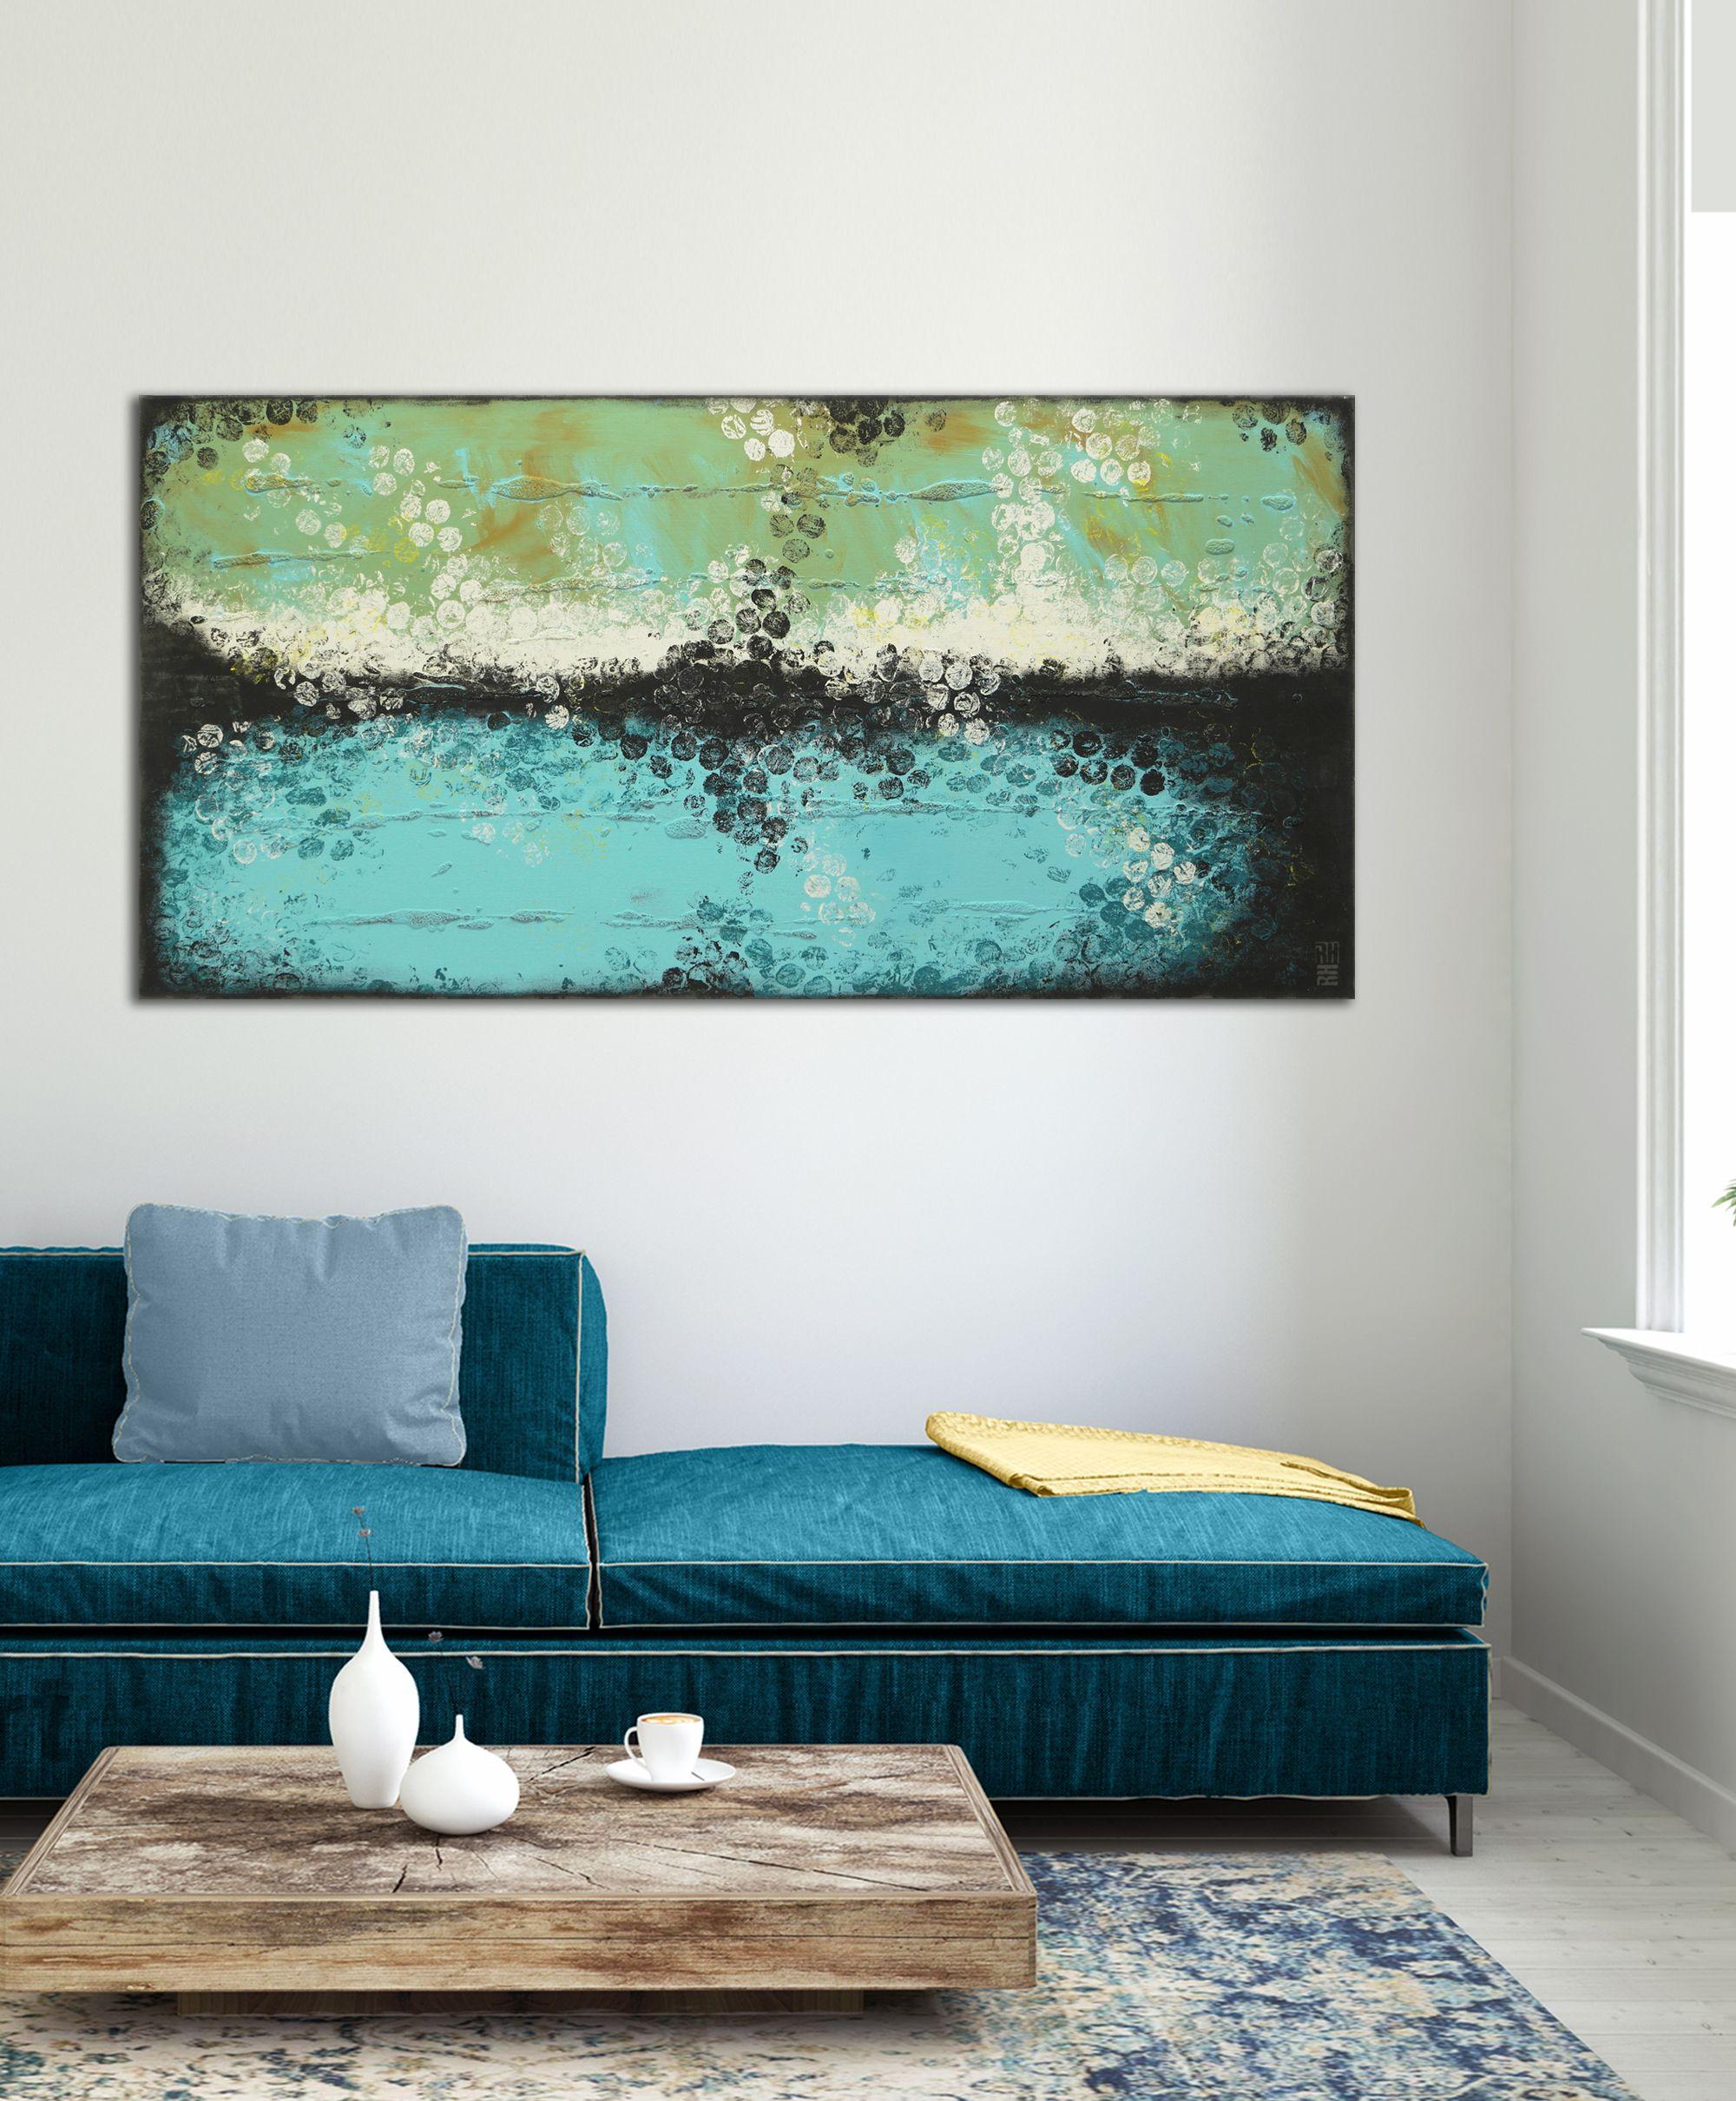 Extra Large Acrylic Abstract Painting, Original artwork created by Ronald Hunter.    An abstract composition of blue and brown shades, reminiscent of an open horizon. This abstract painting is made with many layers of acrylic paint, creating depth